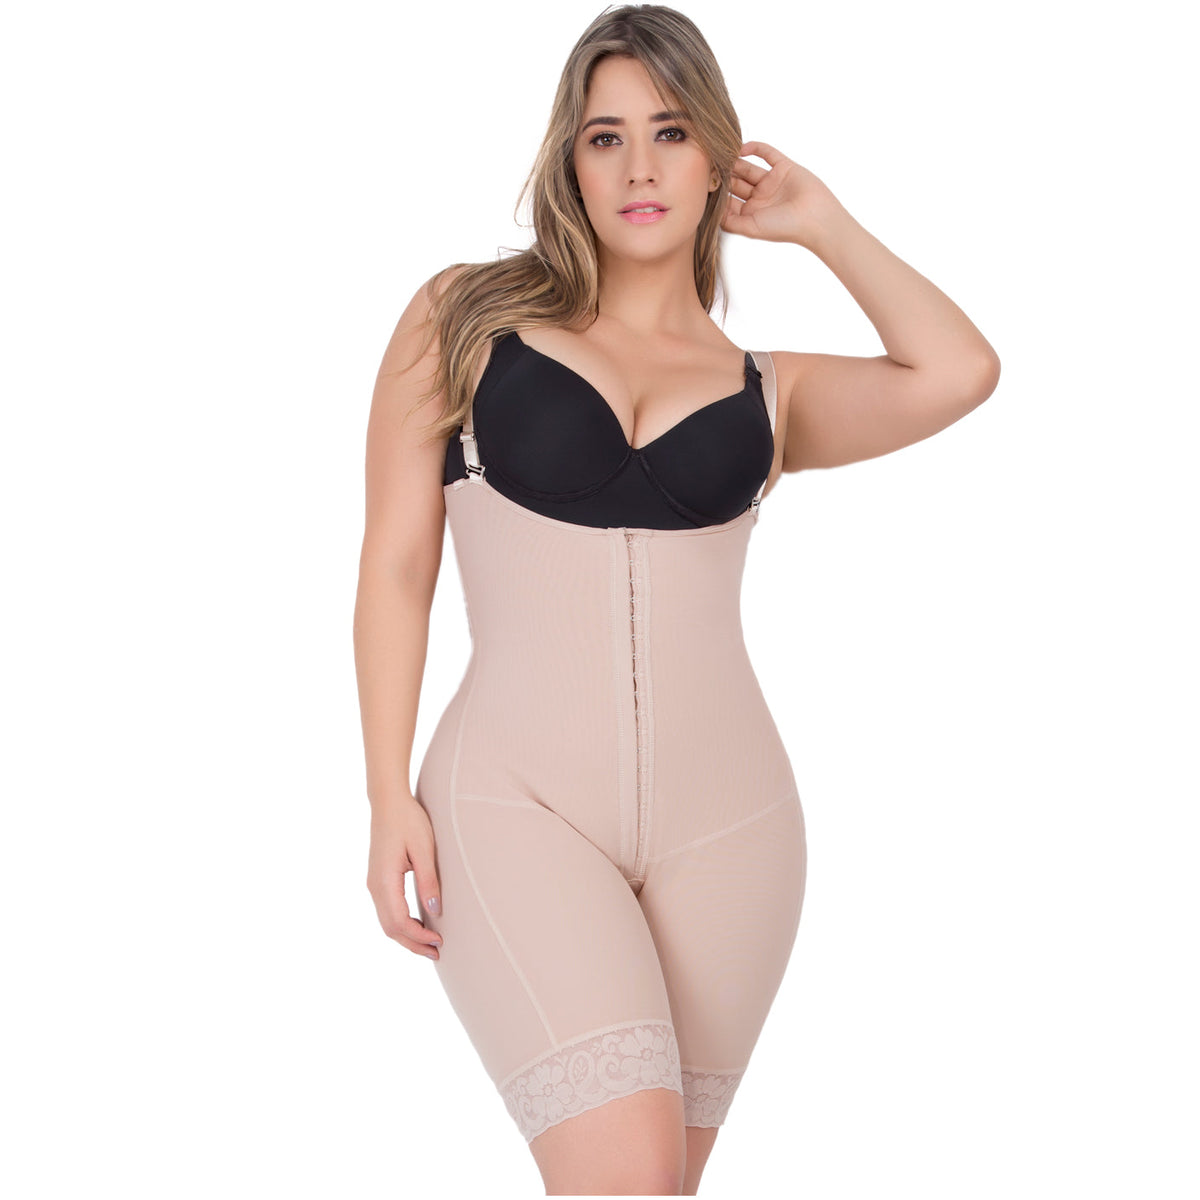 Maria E Colombian Butt Lifter Shapewear With Removable Straps For